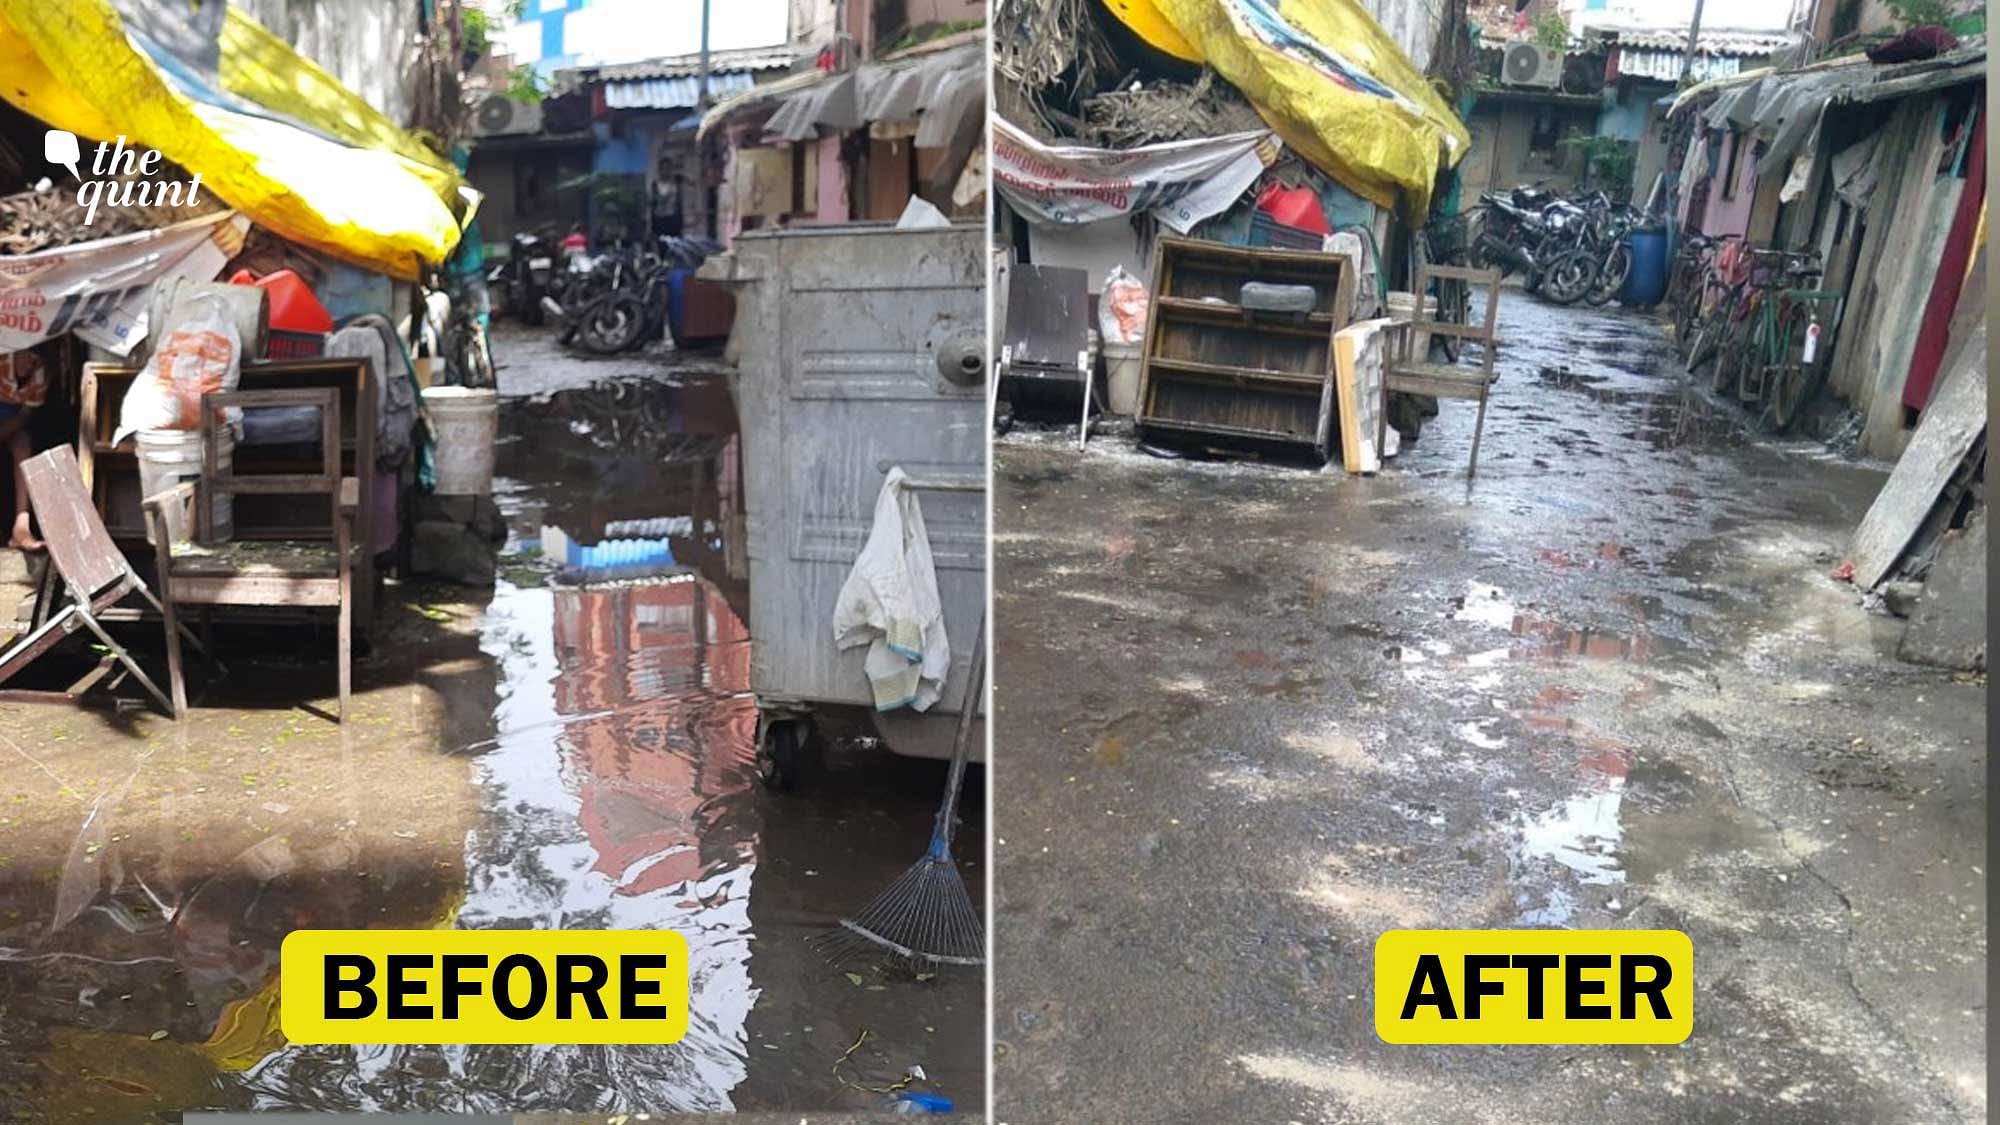 <div class="paragraphs"><p>After The Quint published a report on a slum in Chennai, the Corporation cleared the stagnated water and debris.&nbsp;</p></div>